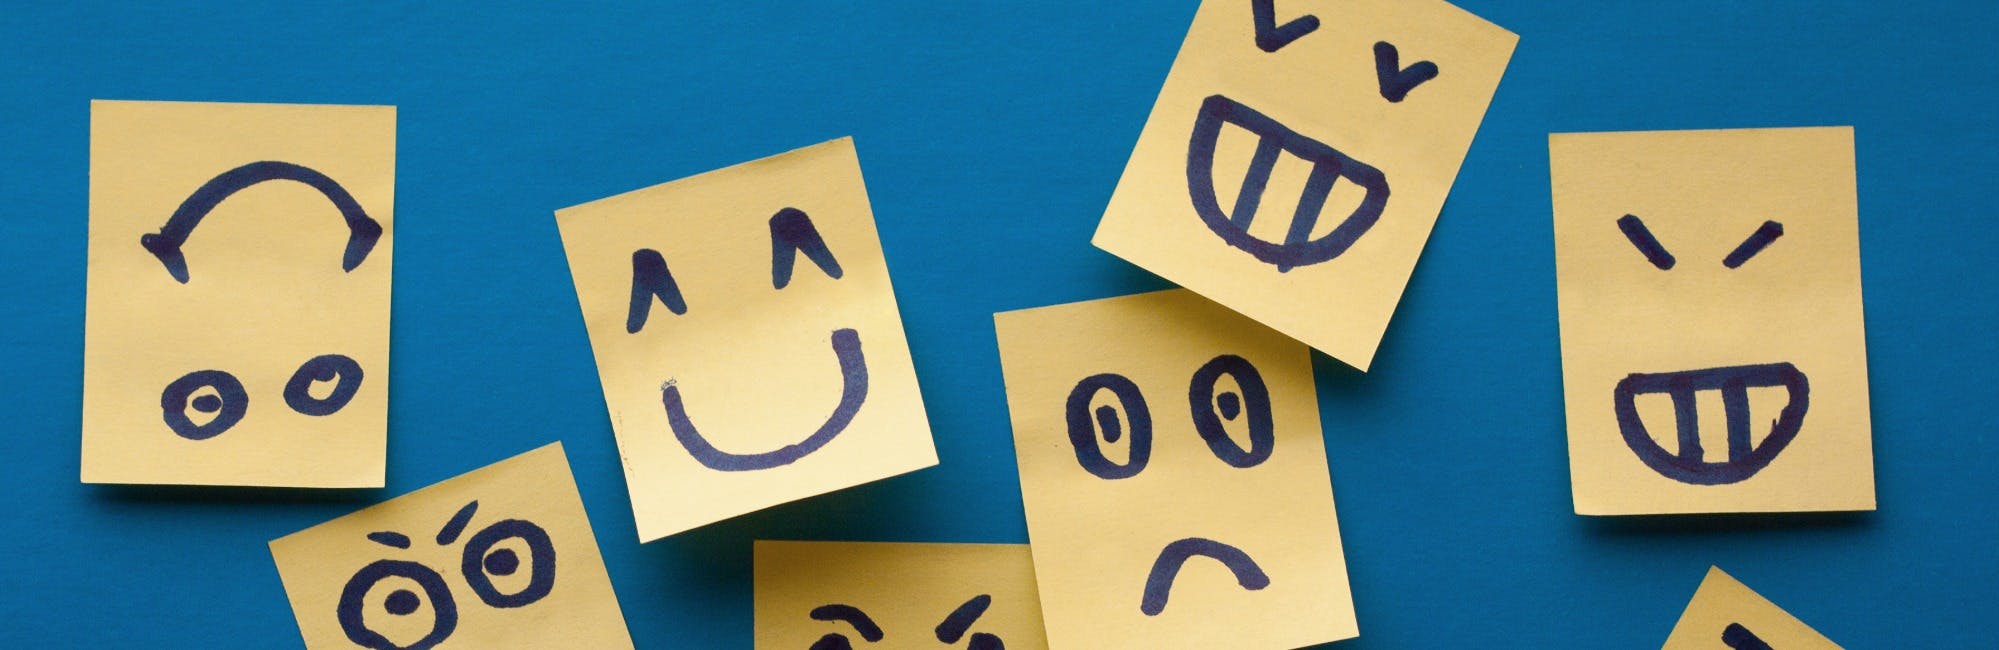 A series of sticky-notes with happy, sad, and angry faces drawn on, conveying a change in mindset